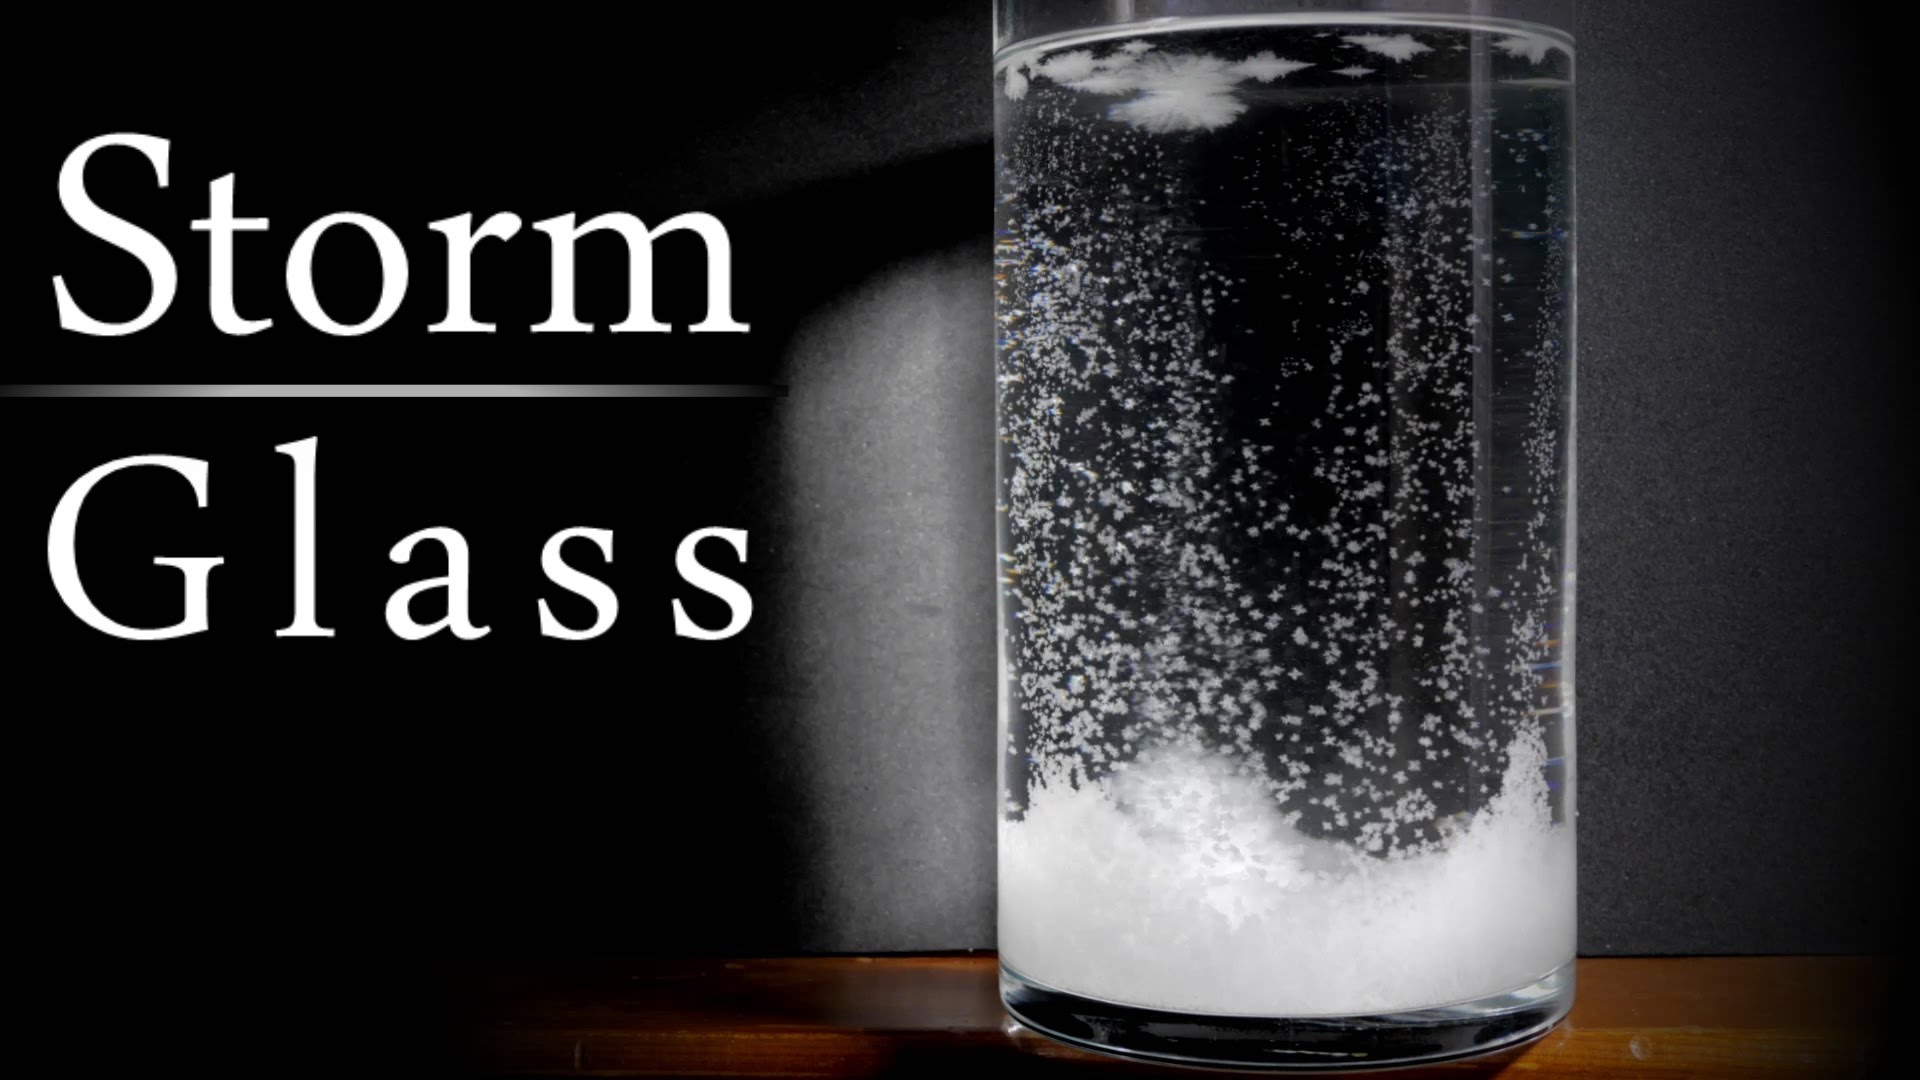 How To Make A Storm Glass That Will Predict The Weather...